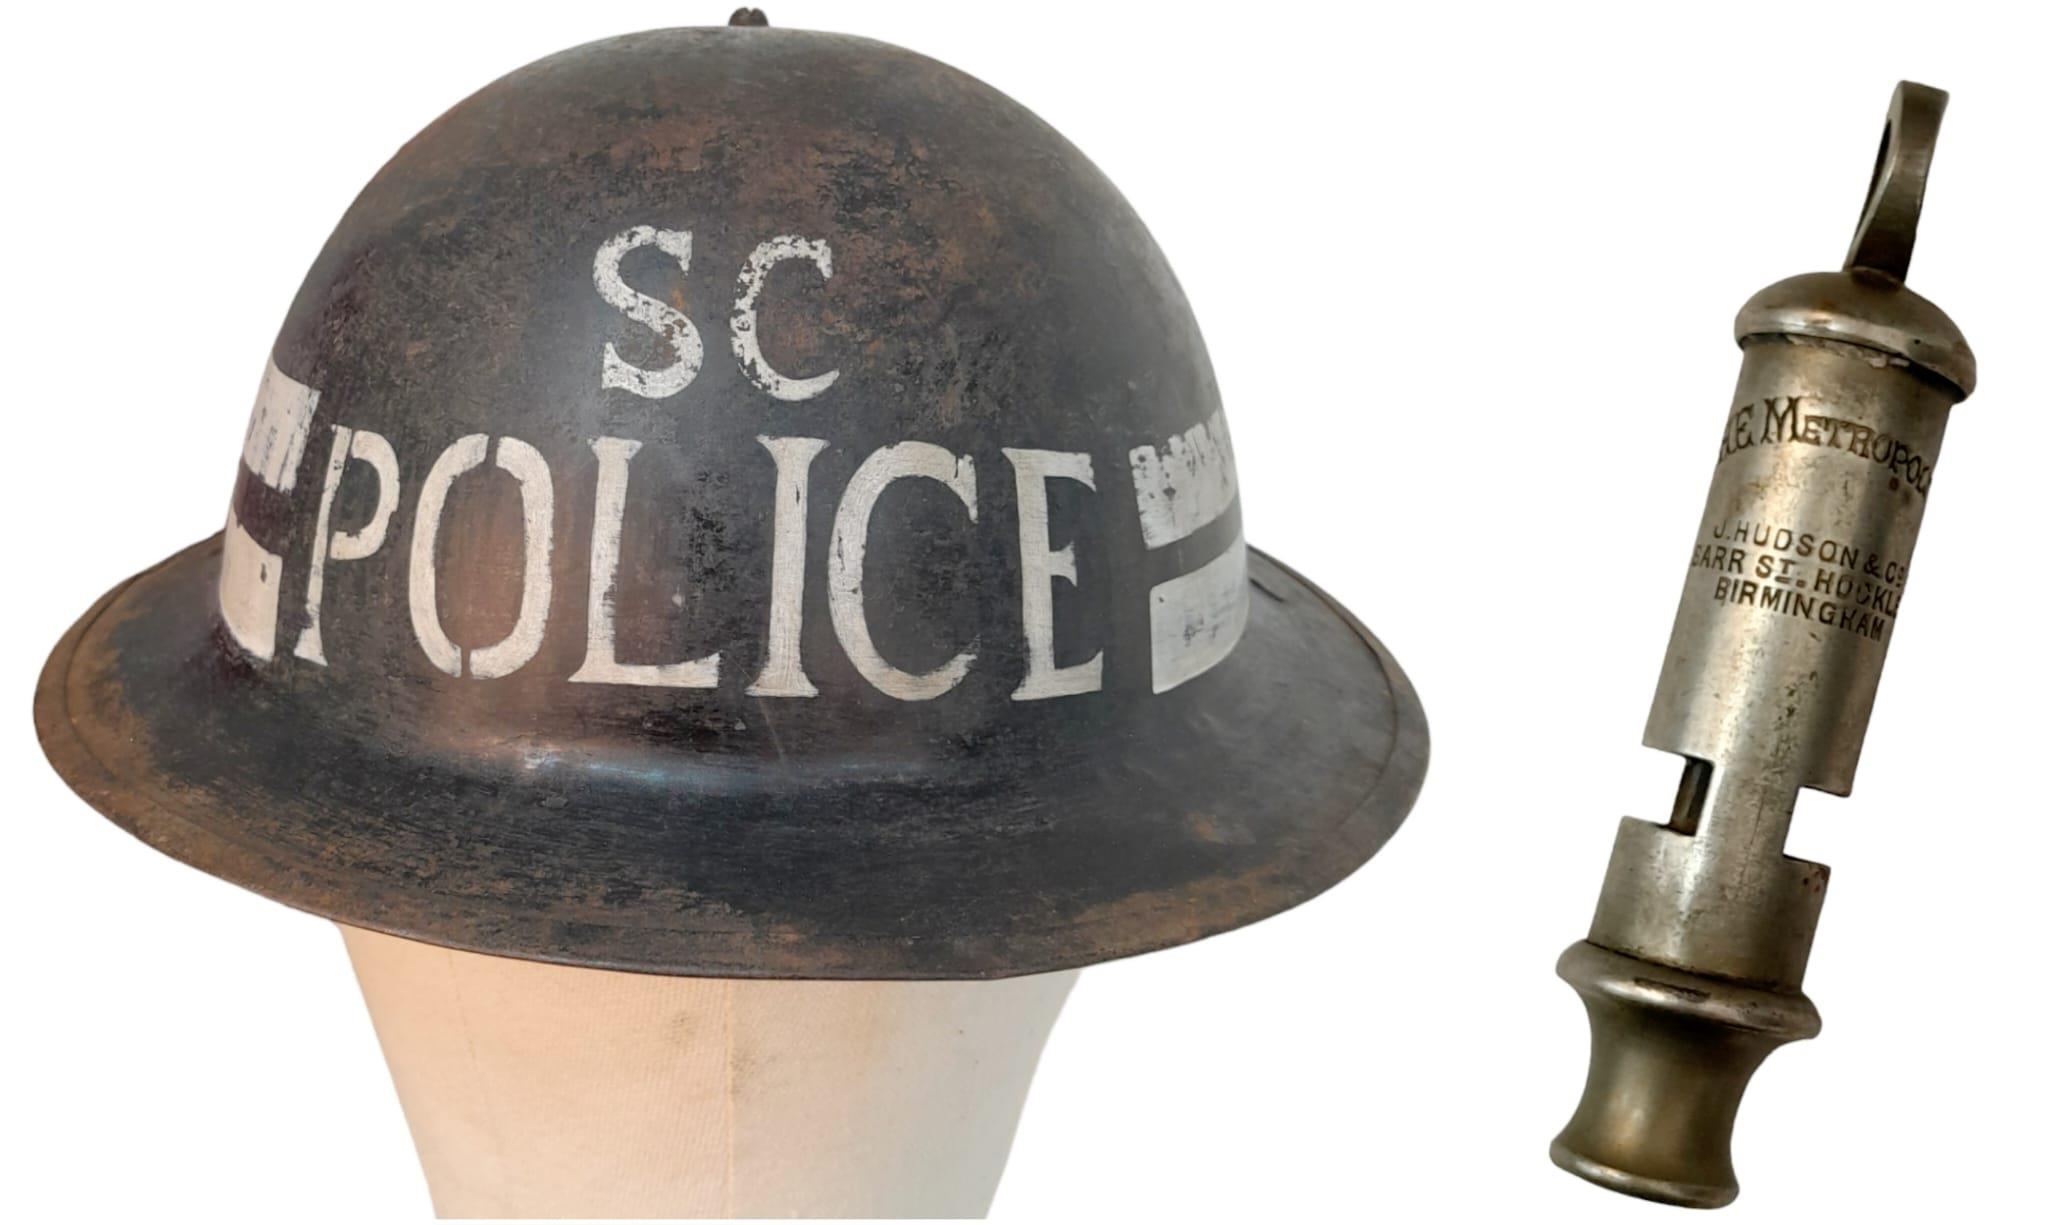 WW2 British Home Front Special Constable’s Helmet, Truncheon and Whistle. An attic find during a